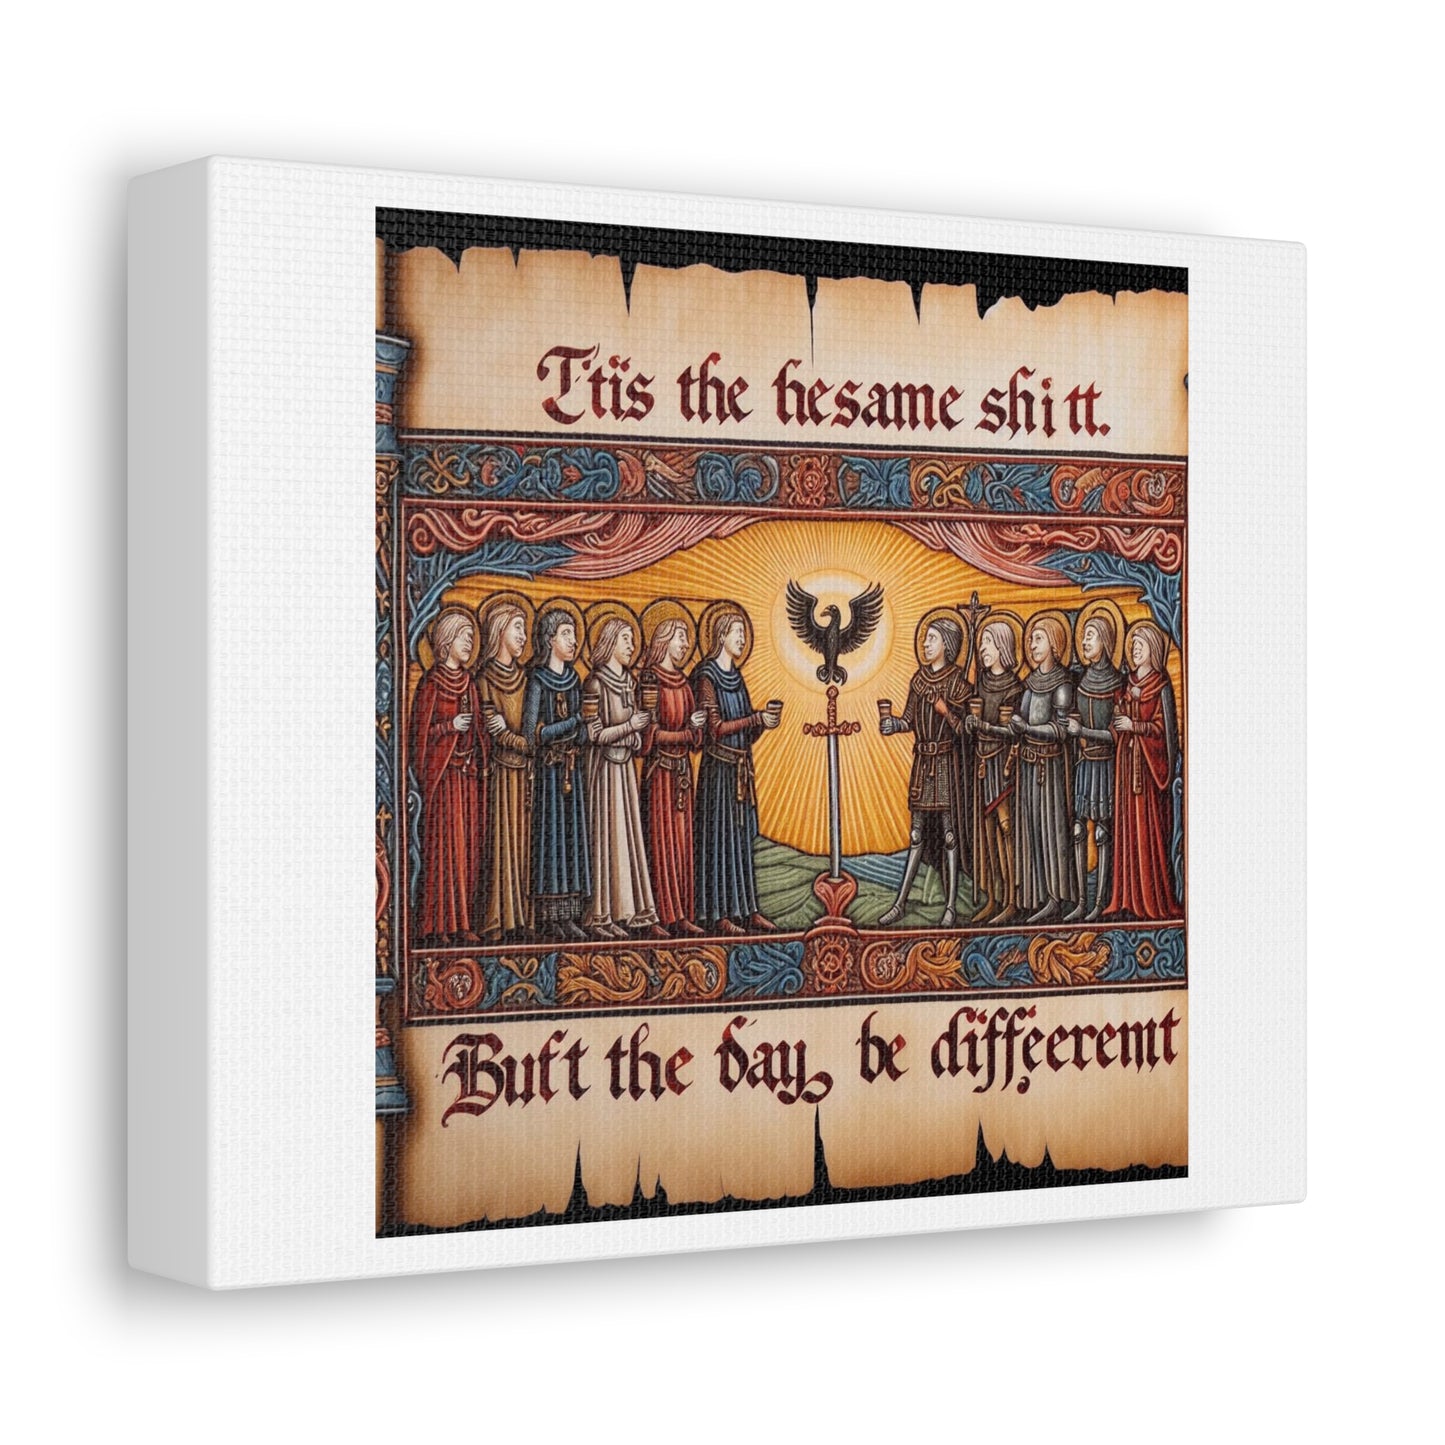 'Tis the Sameth Shit but Thine Day be Differ’nt' II Medieval Tapestry Art Print on Canvas